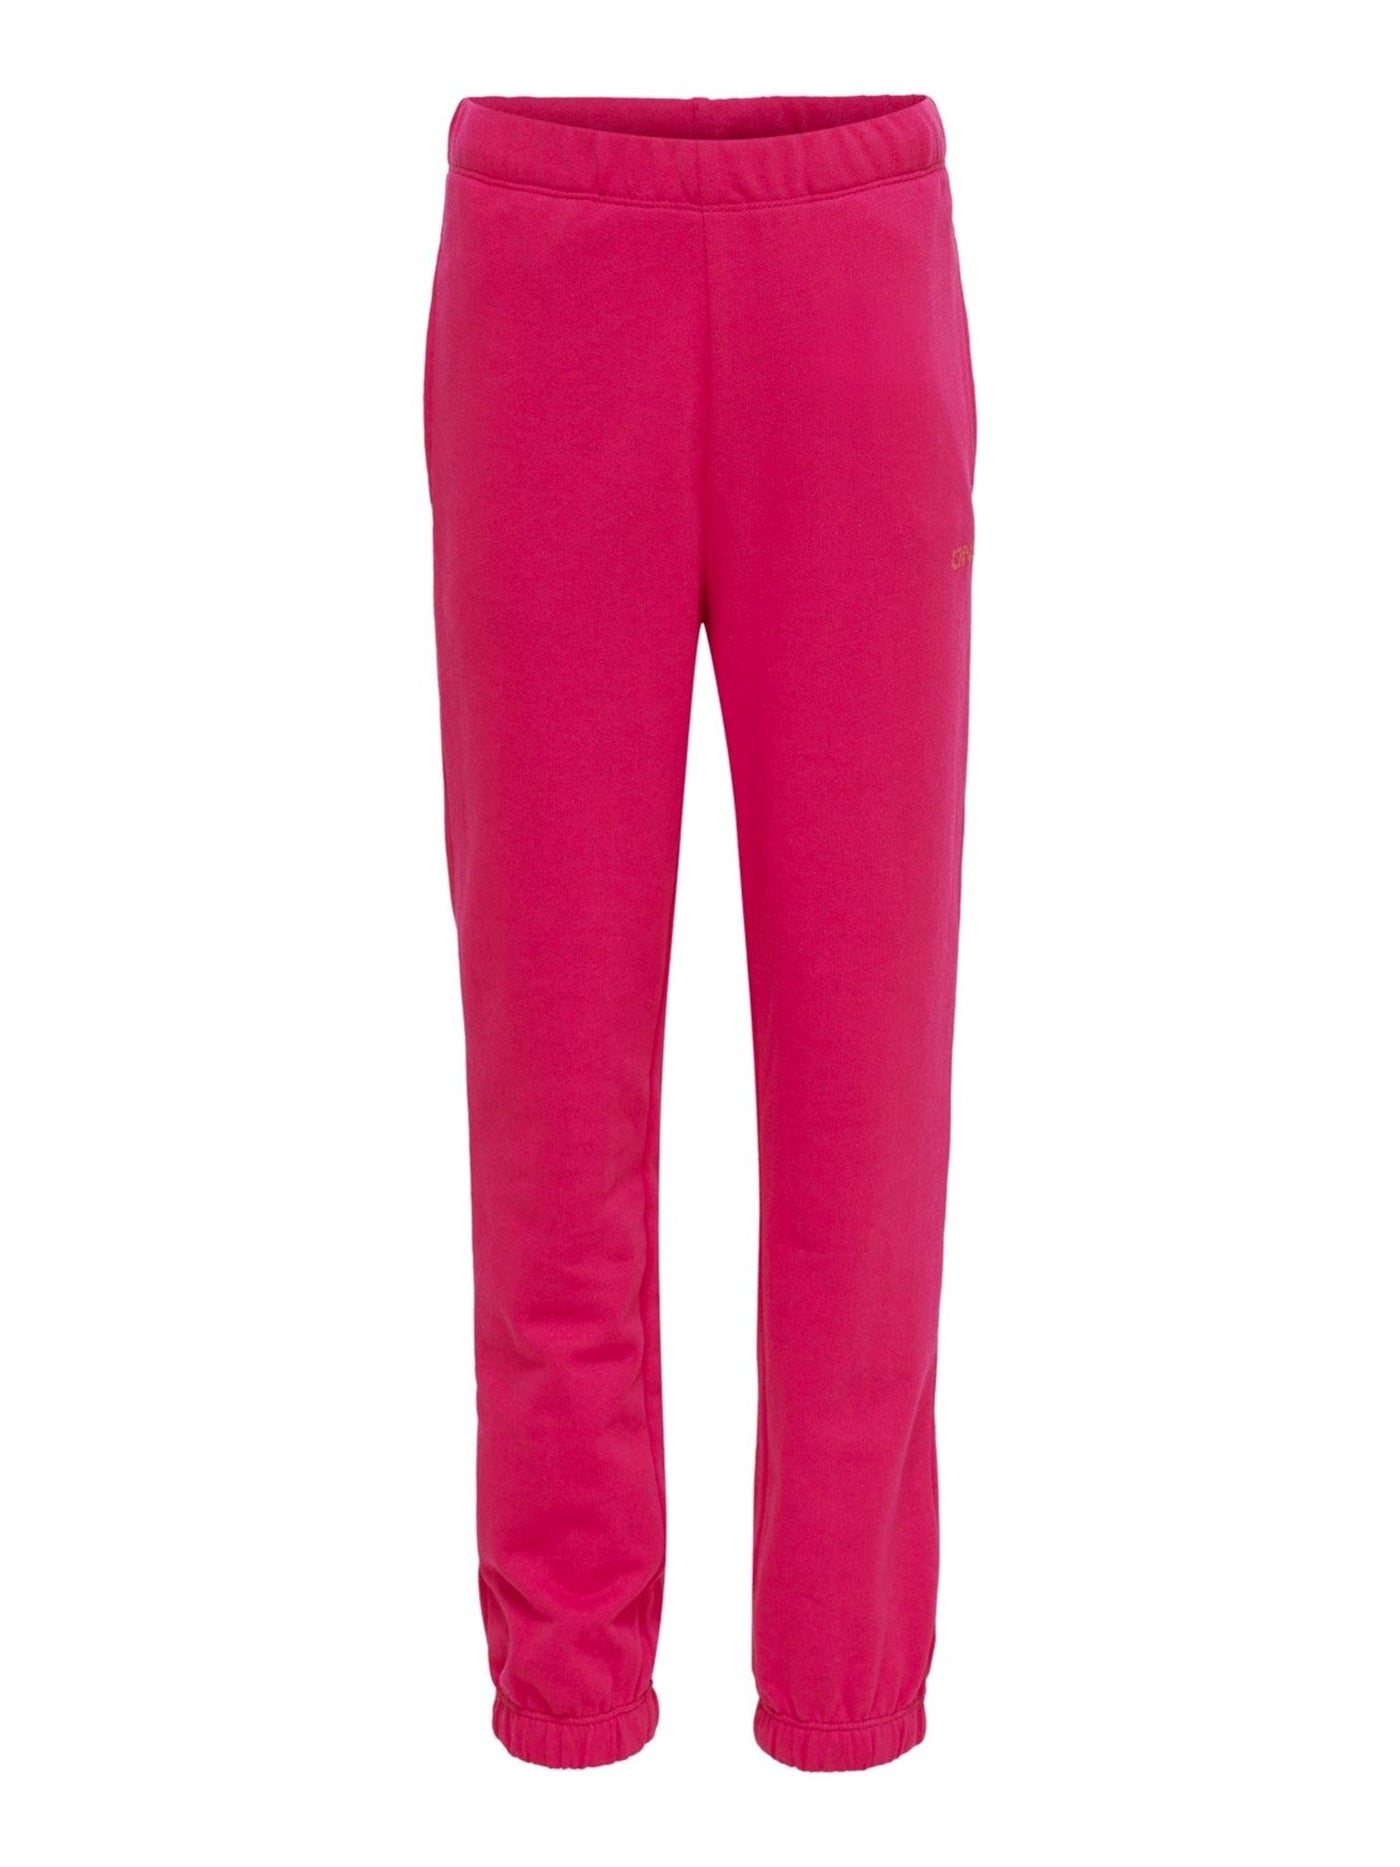 Zoey Sweatpants - Rosa - Kids Only - Rosa